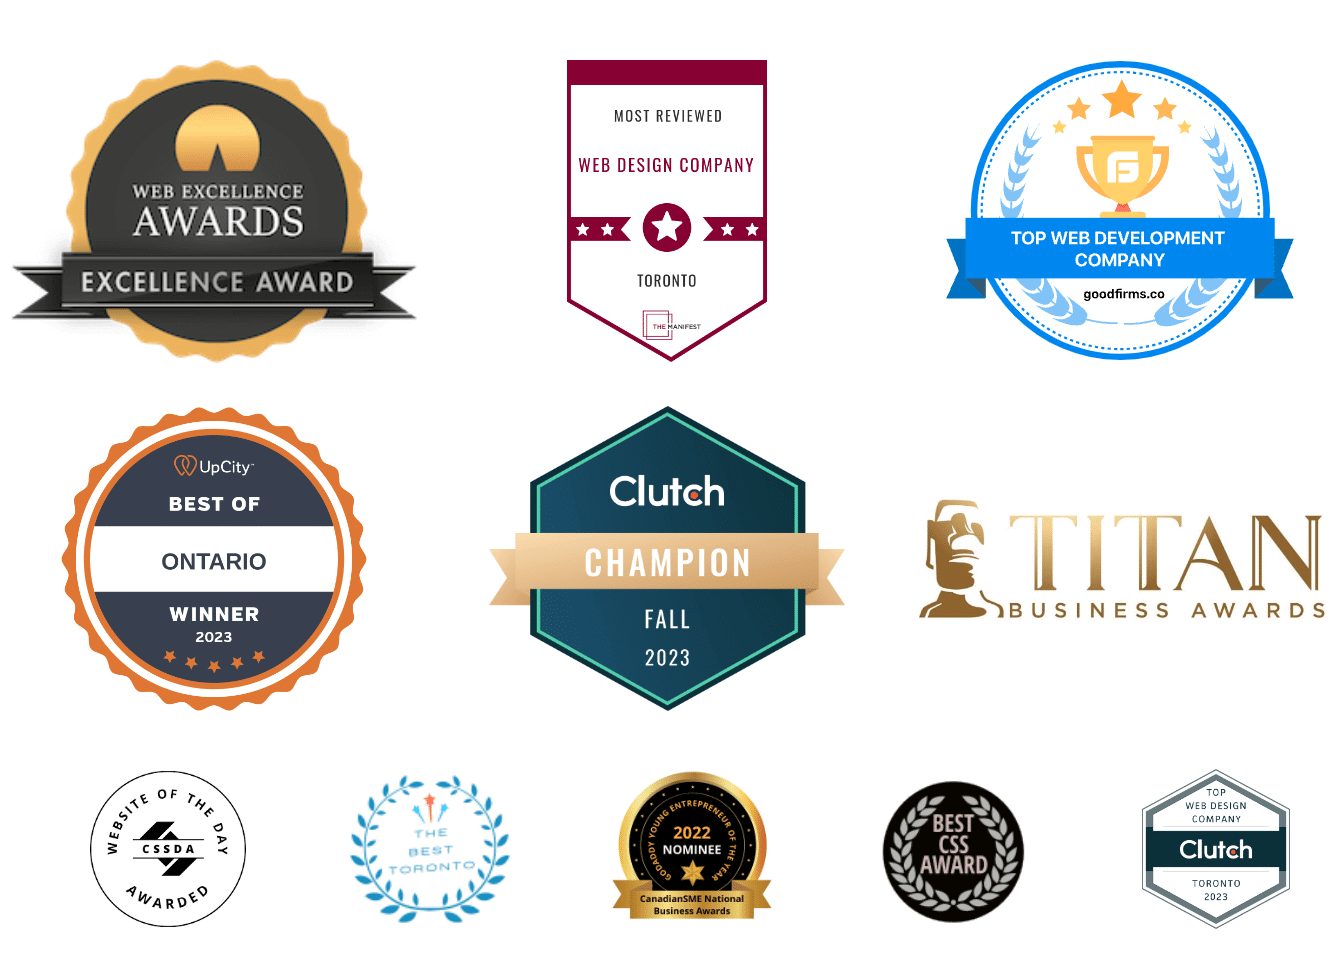 Award Logos Showing Awards Won By Consensus Creative Web Design And Development Agency In Canada And Internationally